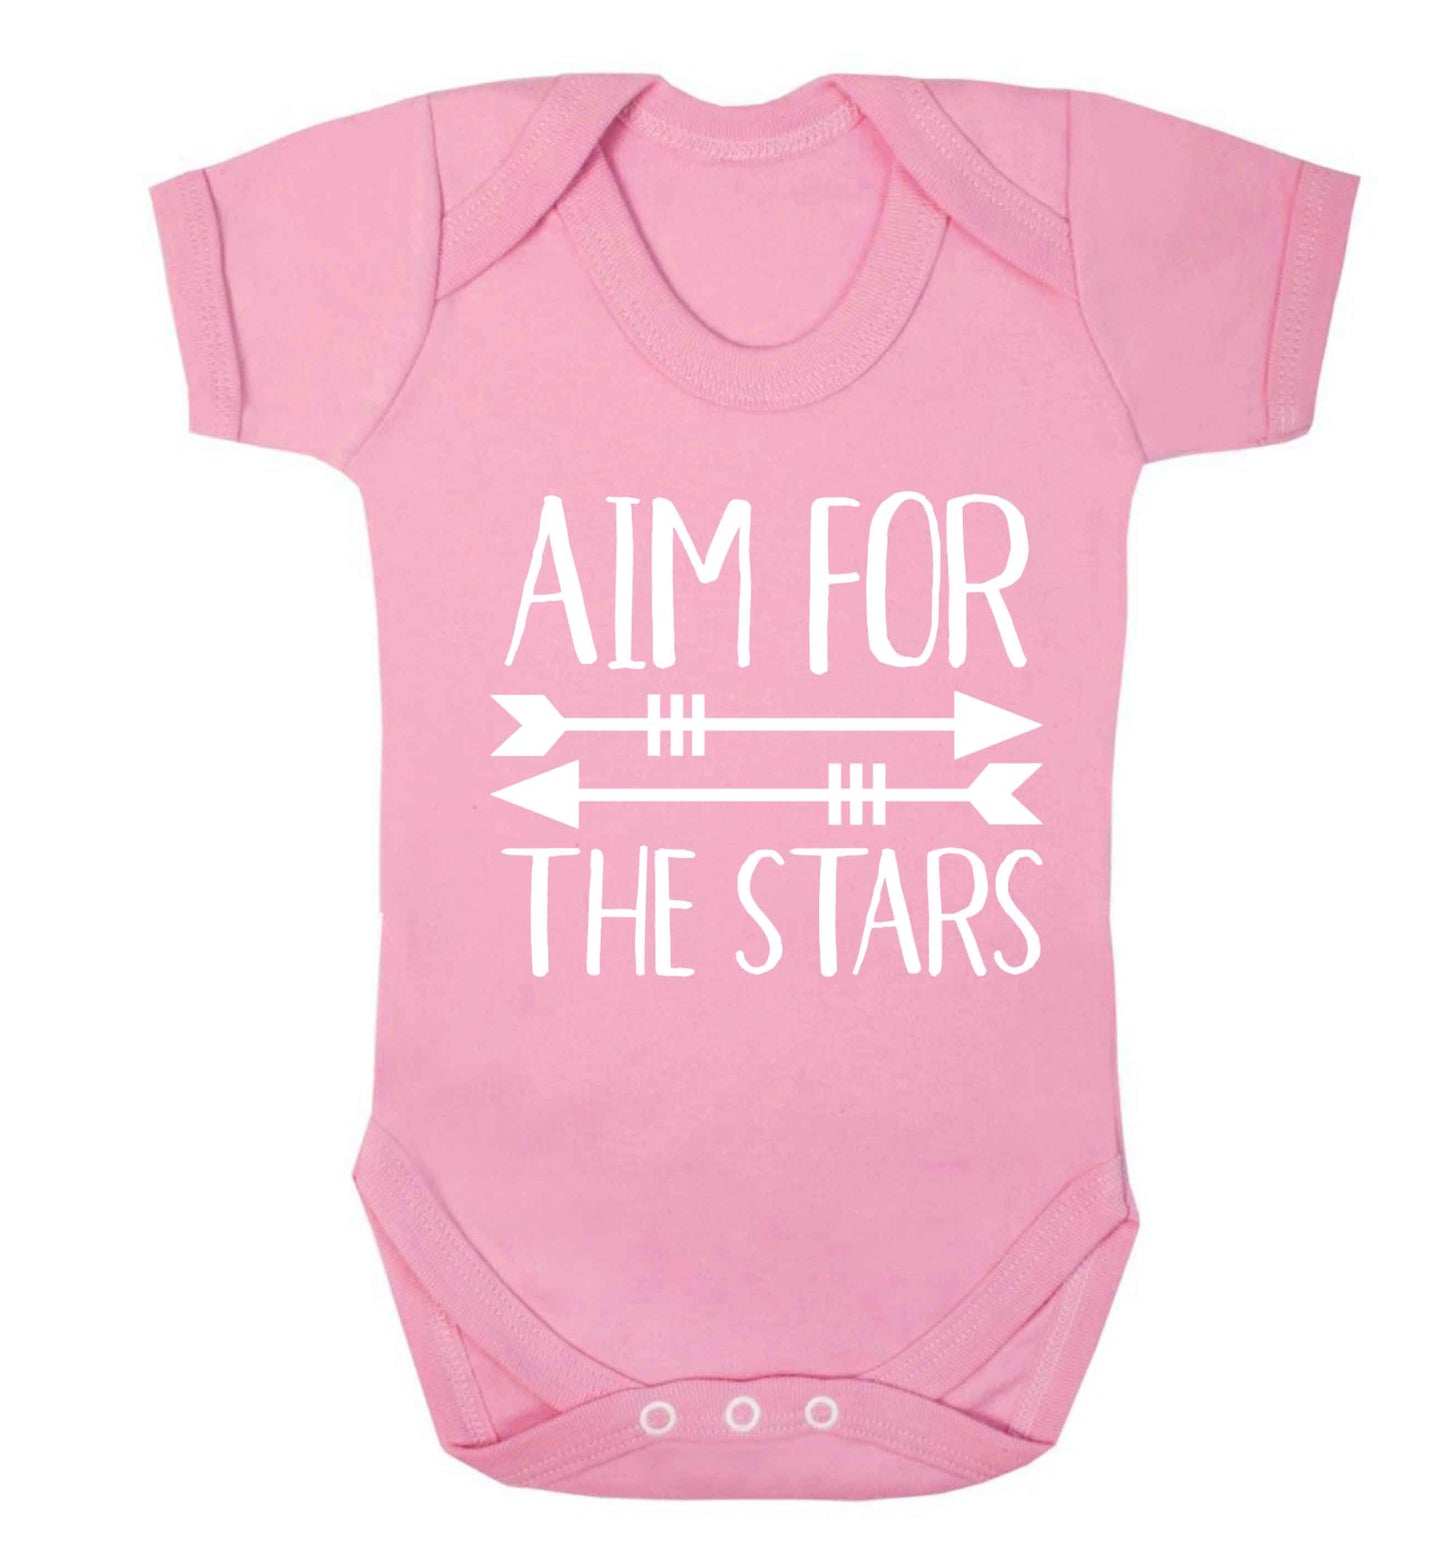 Aim for the stars Baby Vest pale pink 18-24 months